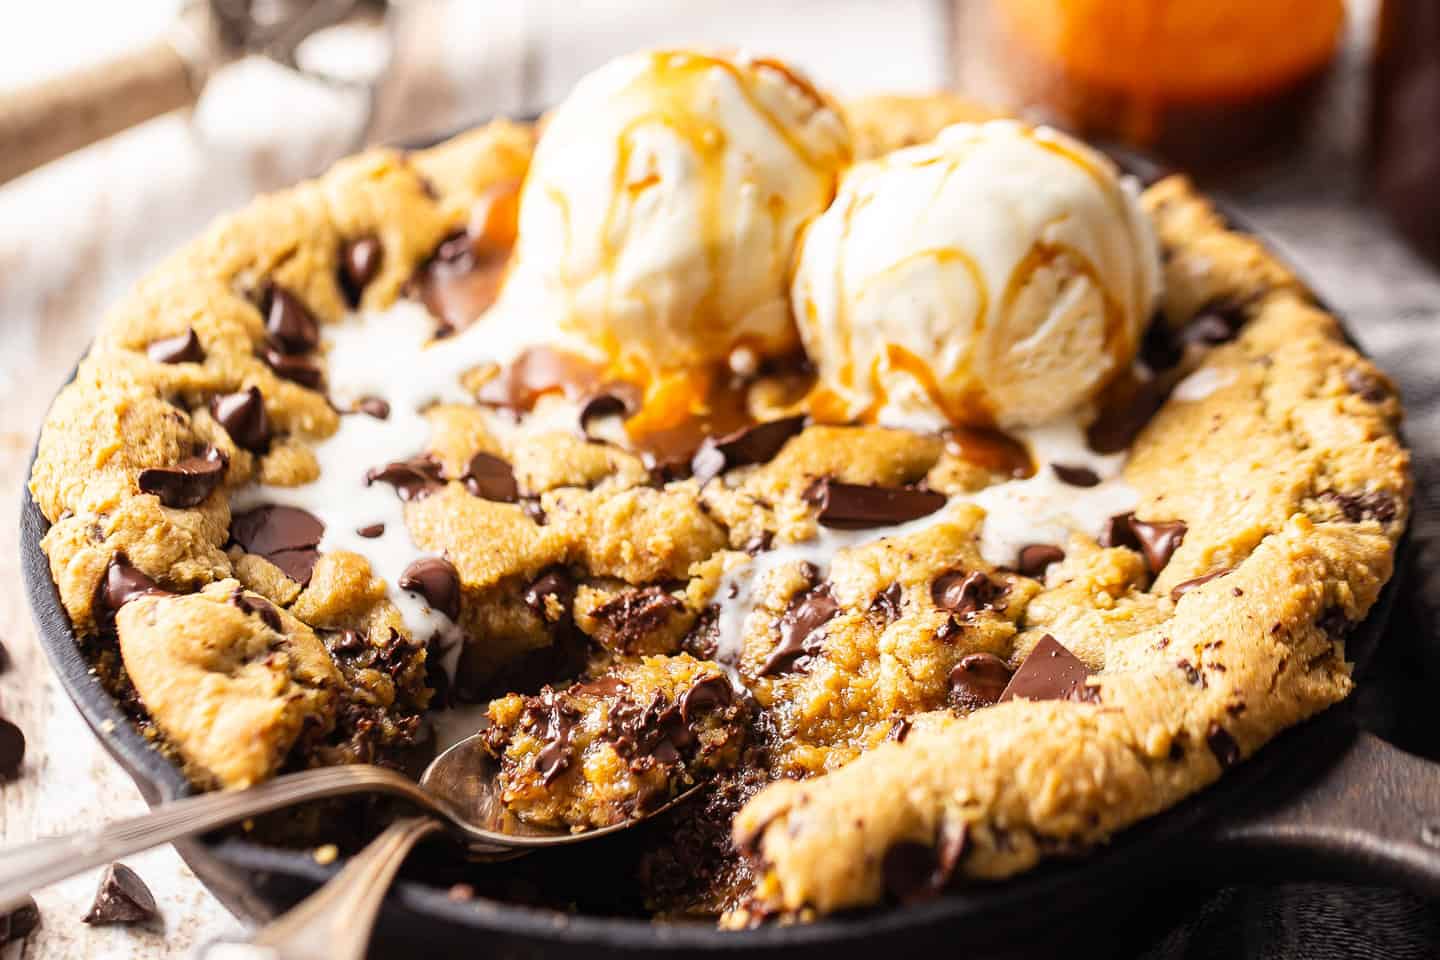 Cast iron skillet cookie with chocolate chips, ice cream, and caramel sauce.